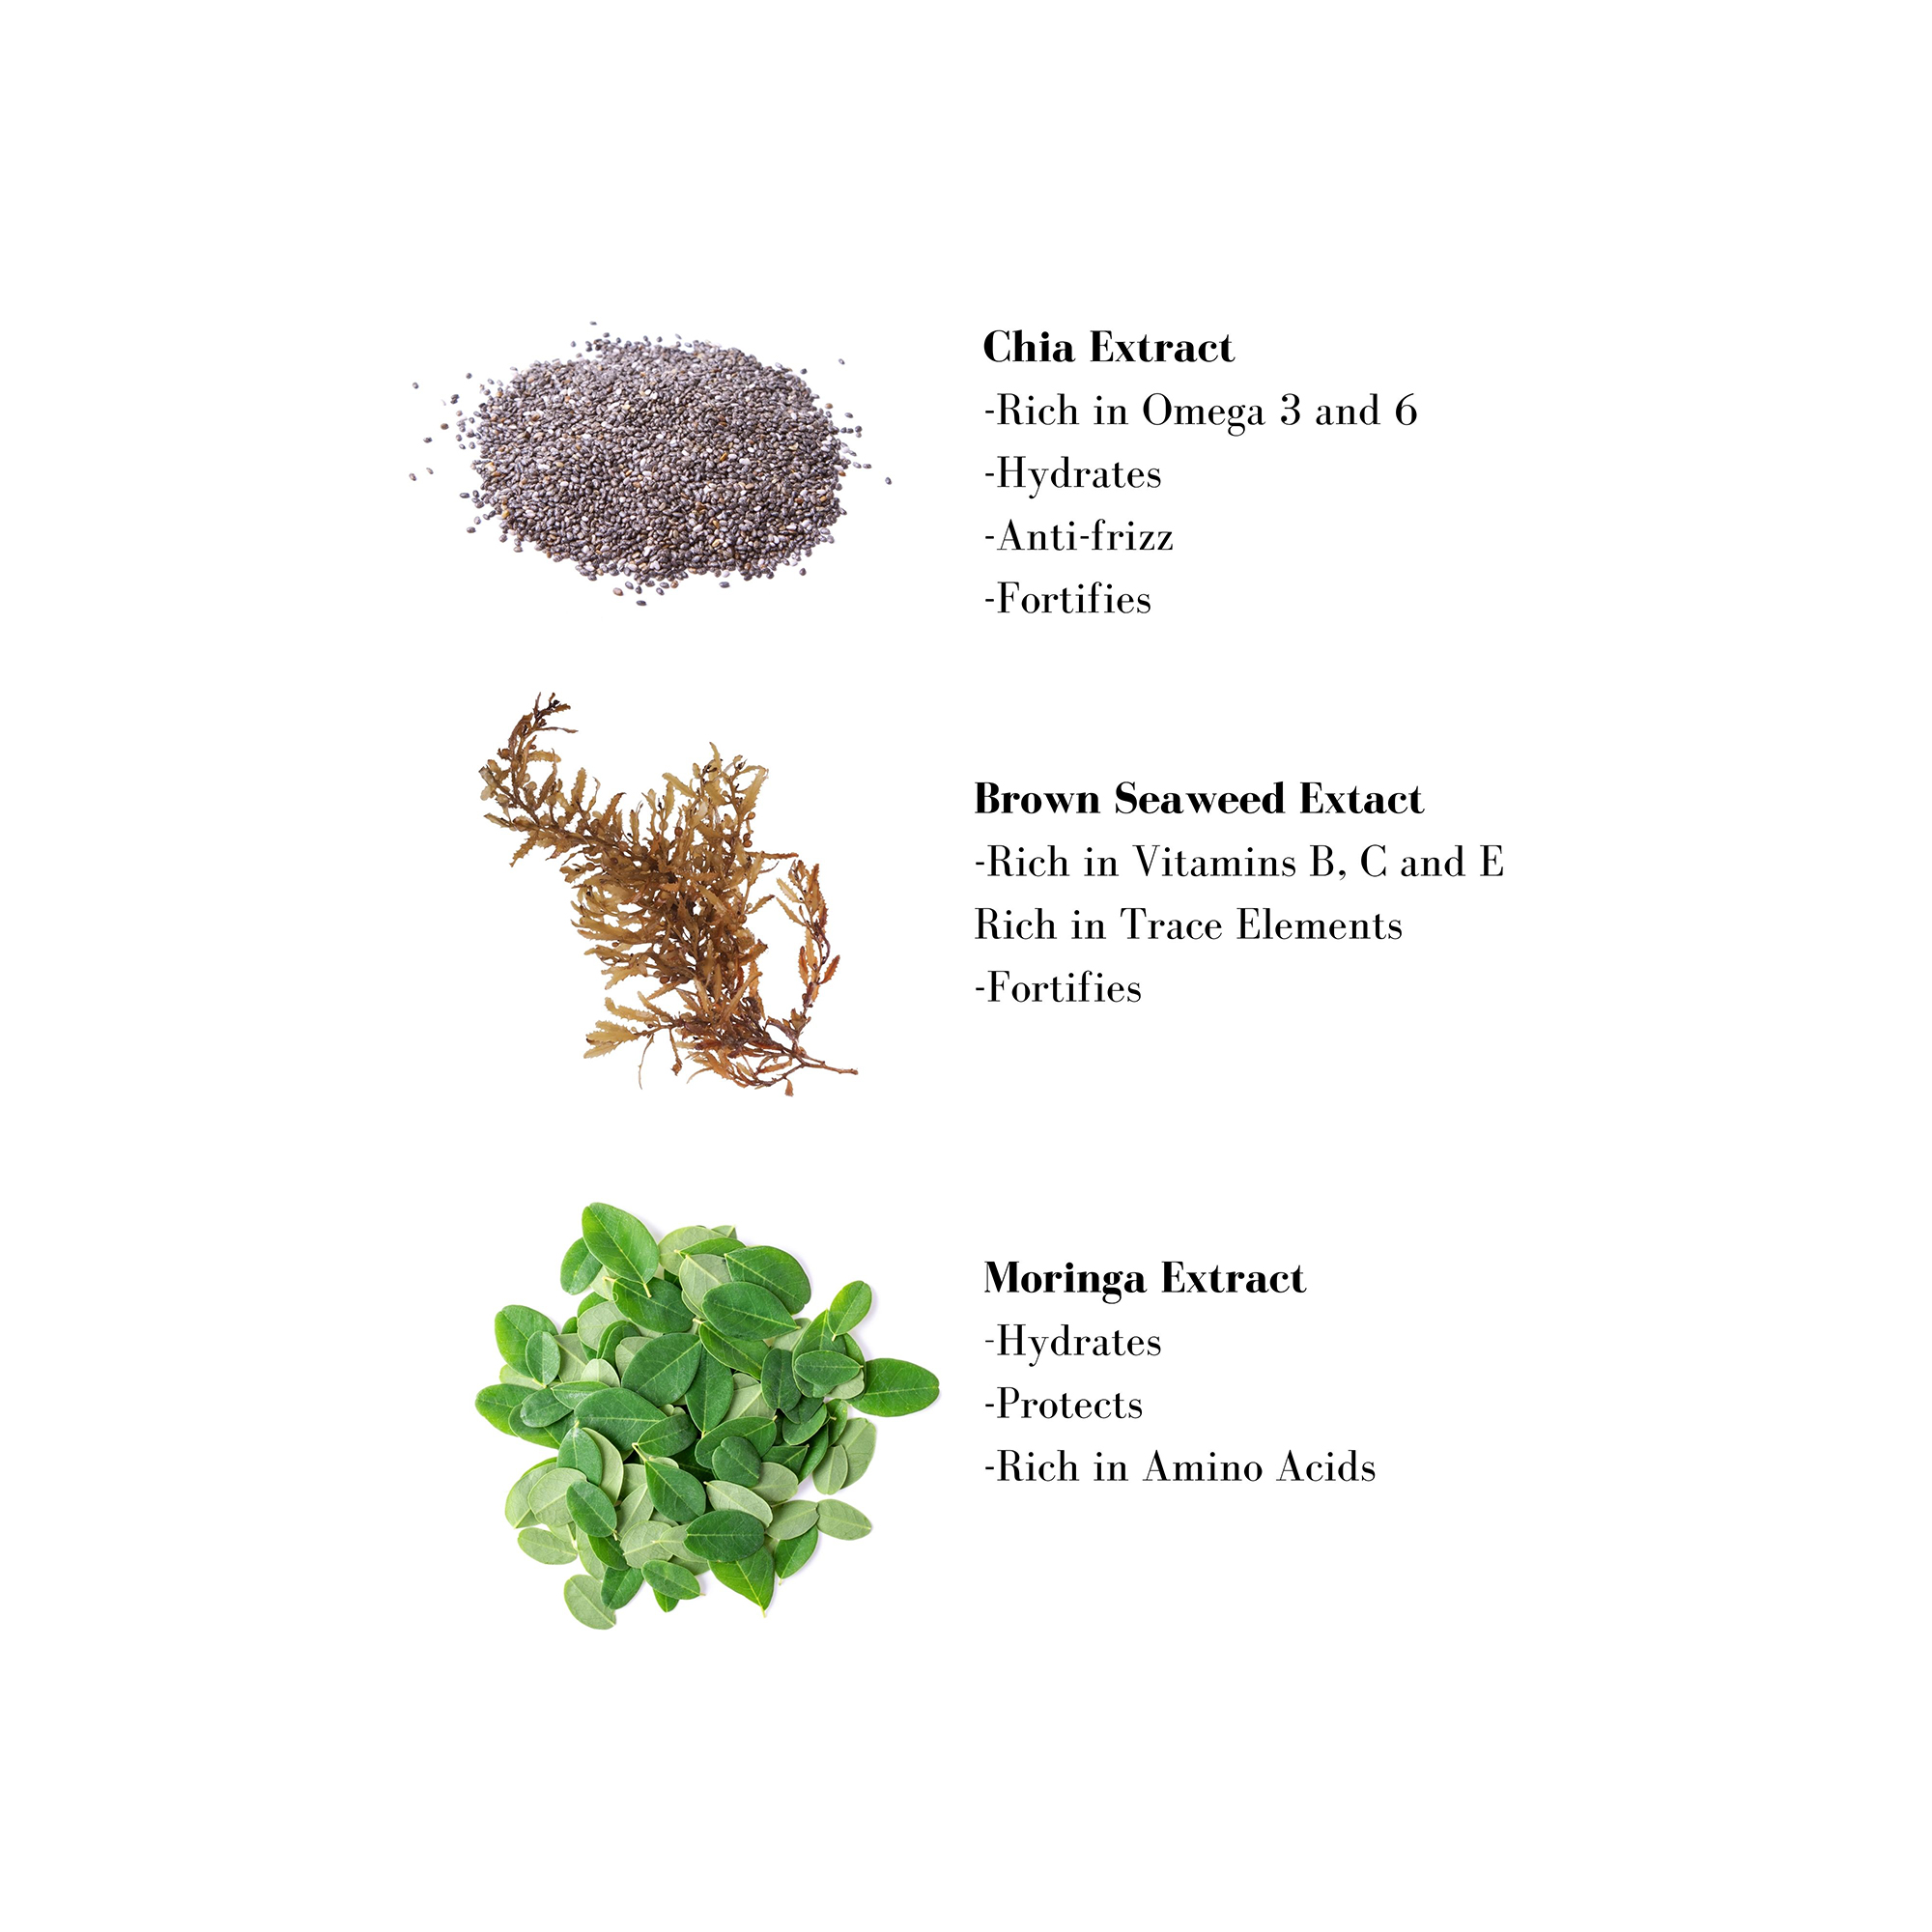 Image 1- Chia Extract -Rich in Omega 3 and 6 -Hydrates -Anti-frizz -Fortifies
              Brown Seaweed Extact -Rich in Vitamins B, C and E Rich in Trace Elements -Fortifies Moringa Extract -Hydrates -Protects -Rich in Amino Acids